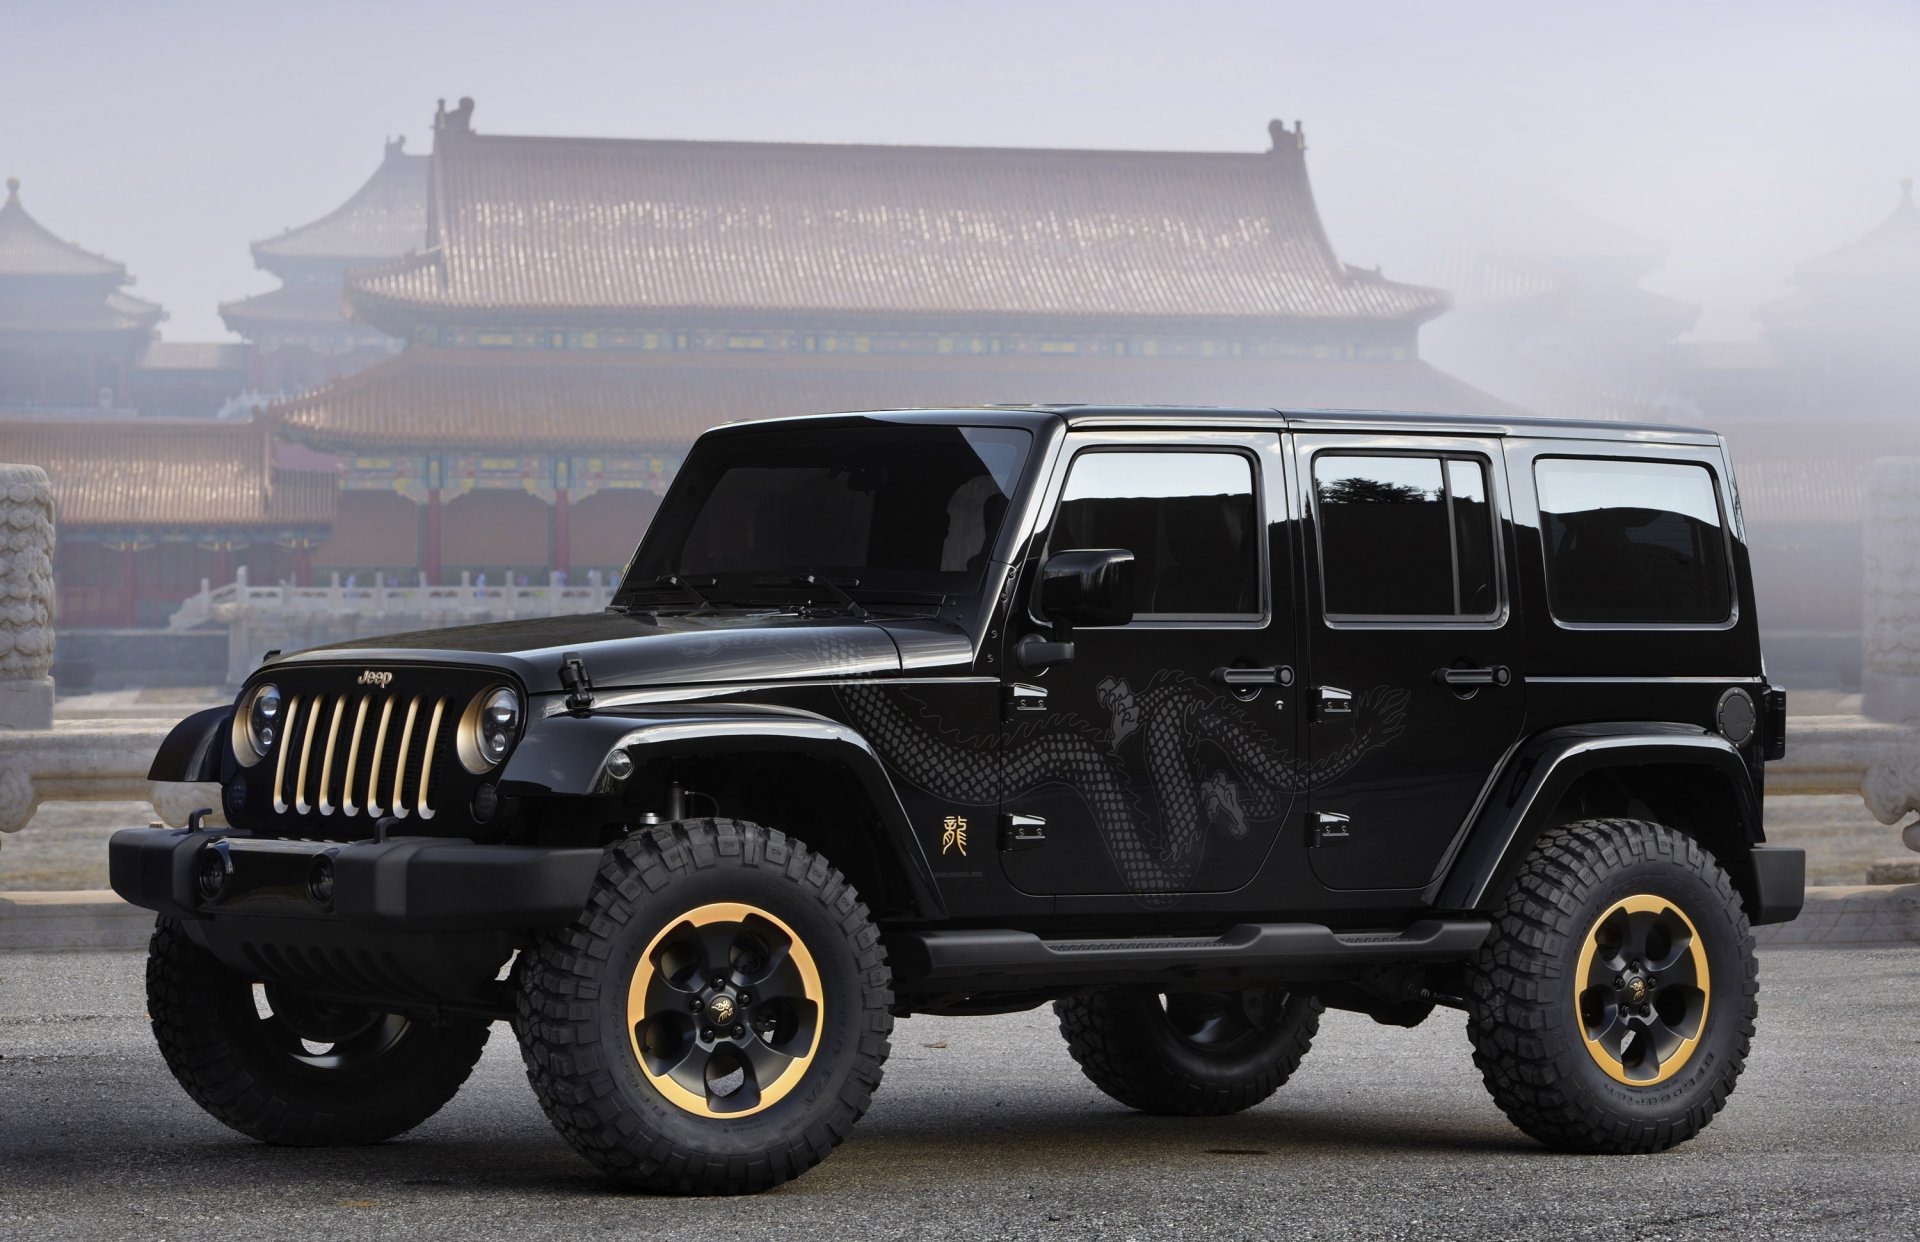 80 Jeep Wrangler Hd Wallpapers Background Images